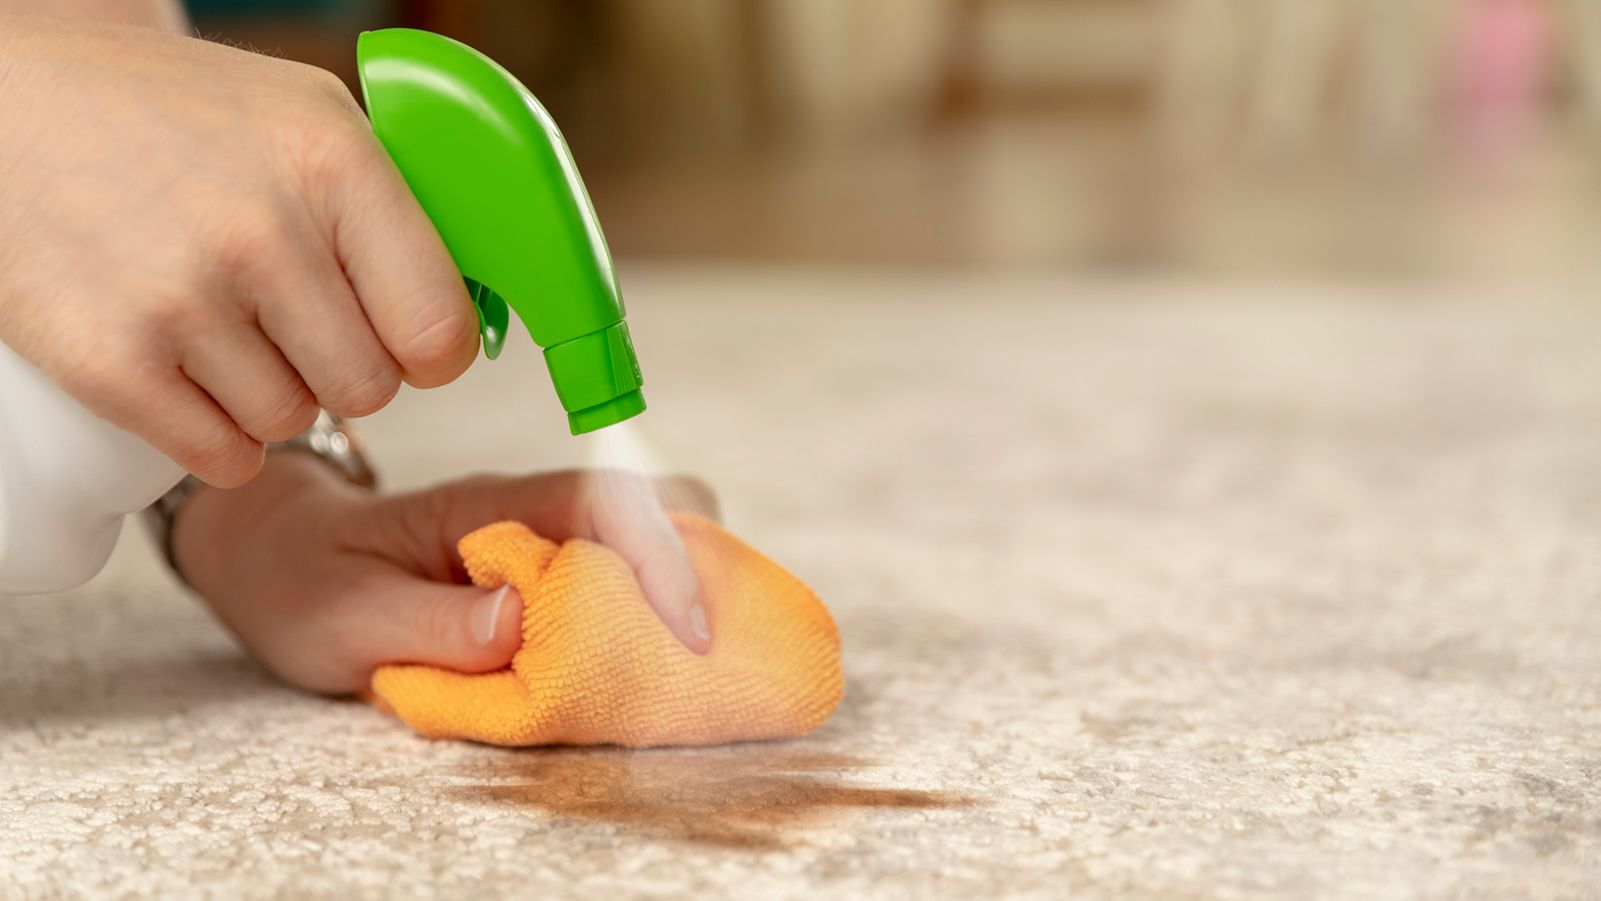 The best stain removers, according to experts